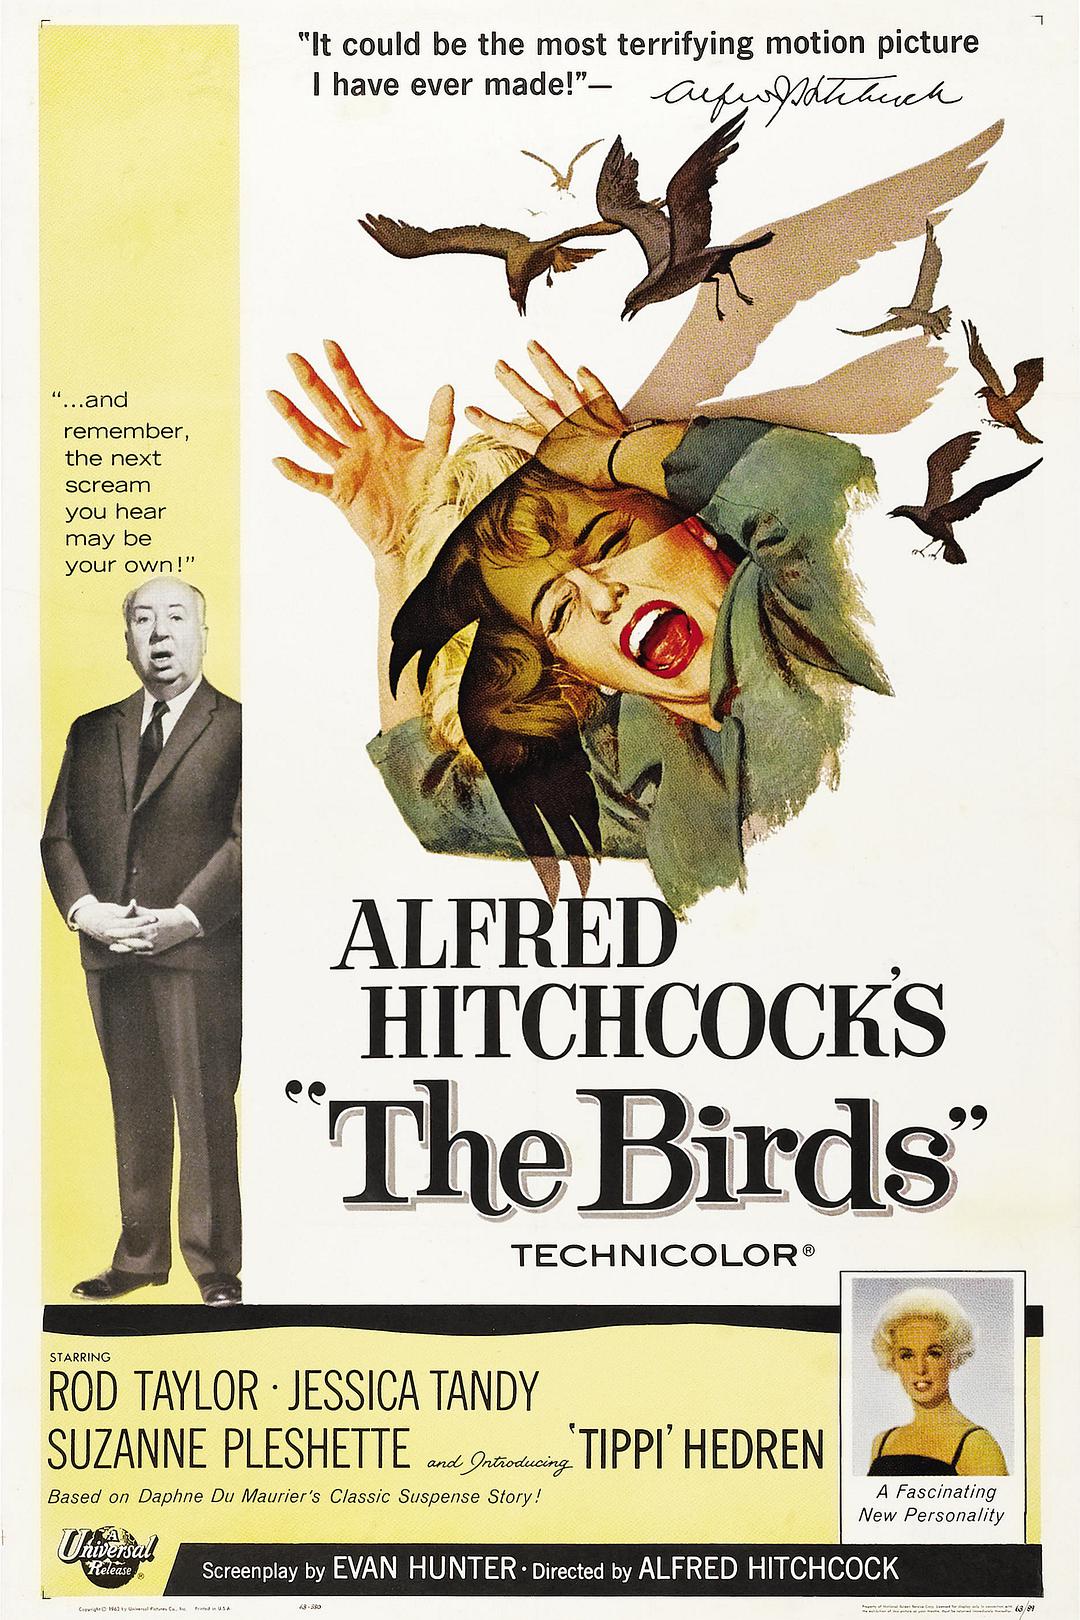 Ⱥ The.Birds.1963.1080p.BluRay.x264.DTS-HD.MA.2.0-SWTYBLZ 11.14GB-1.png